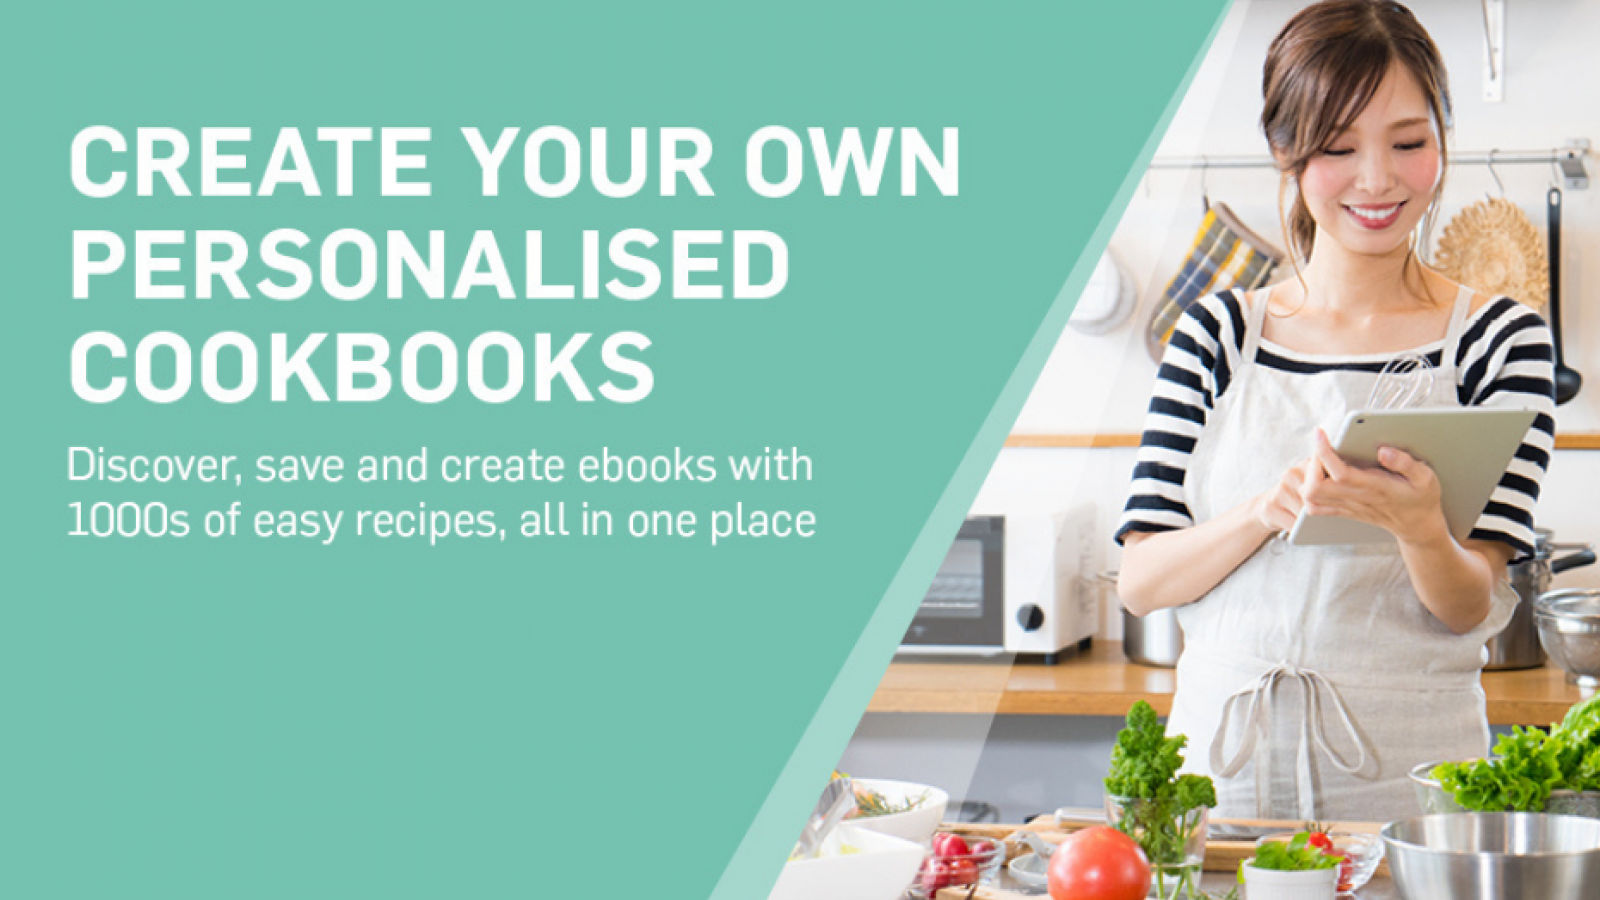 Create cookbooks online with myfoodbook